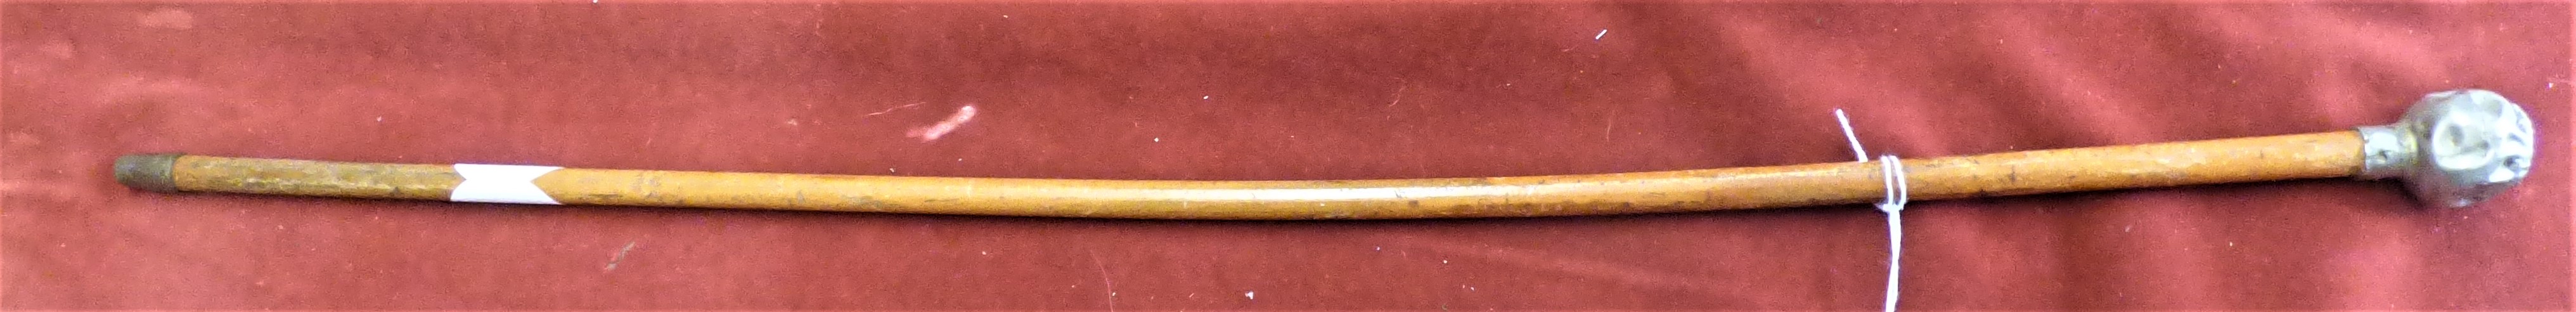 British WWI Norfolk Regiment Swagger Stick with a silver plated handle and tip, the handle has